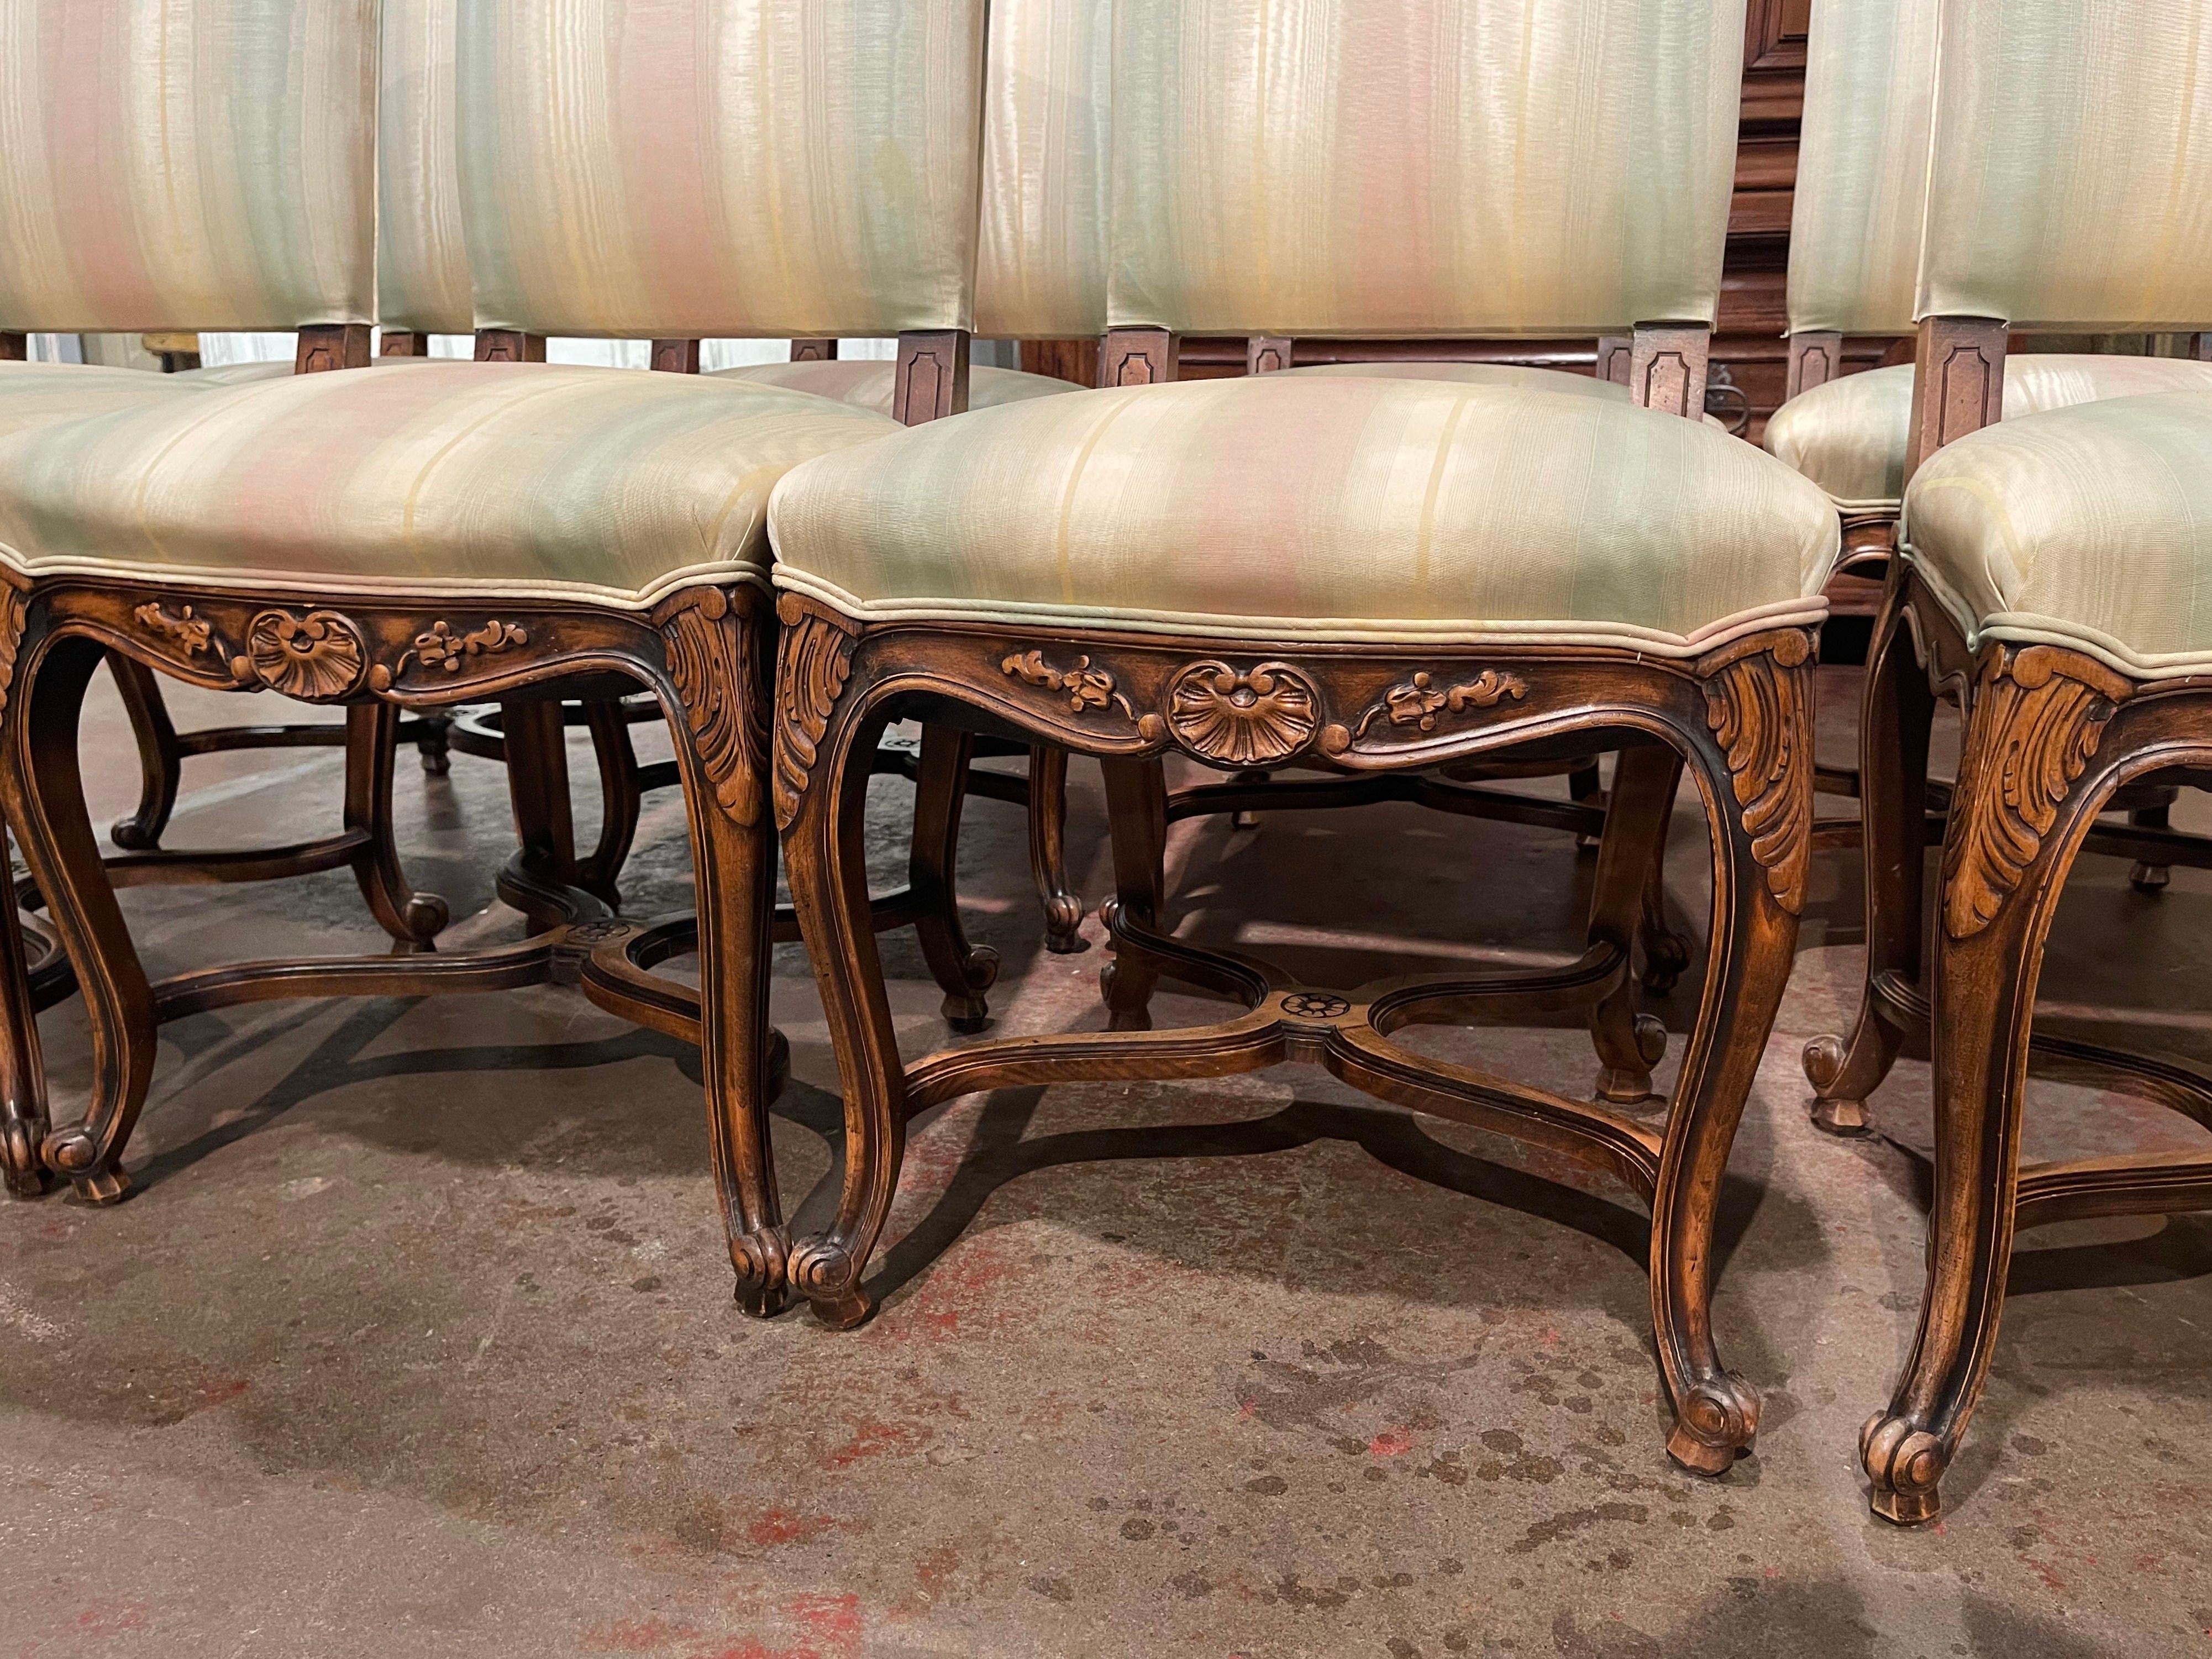 Patinated Early 20th Century Louis XV Carved Walnut Dining Chairs and Armchairs-Set of 10 